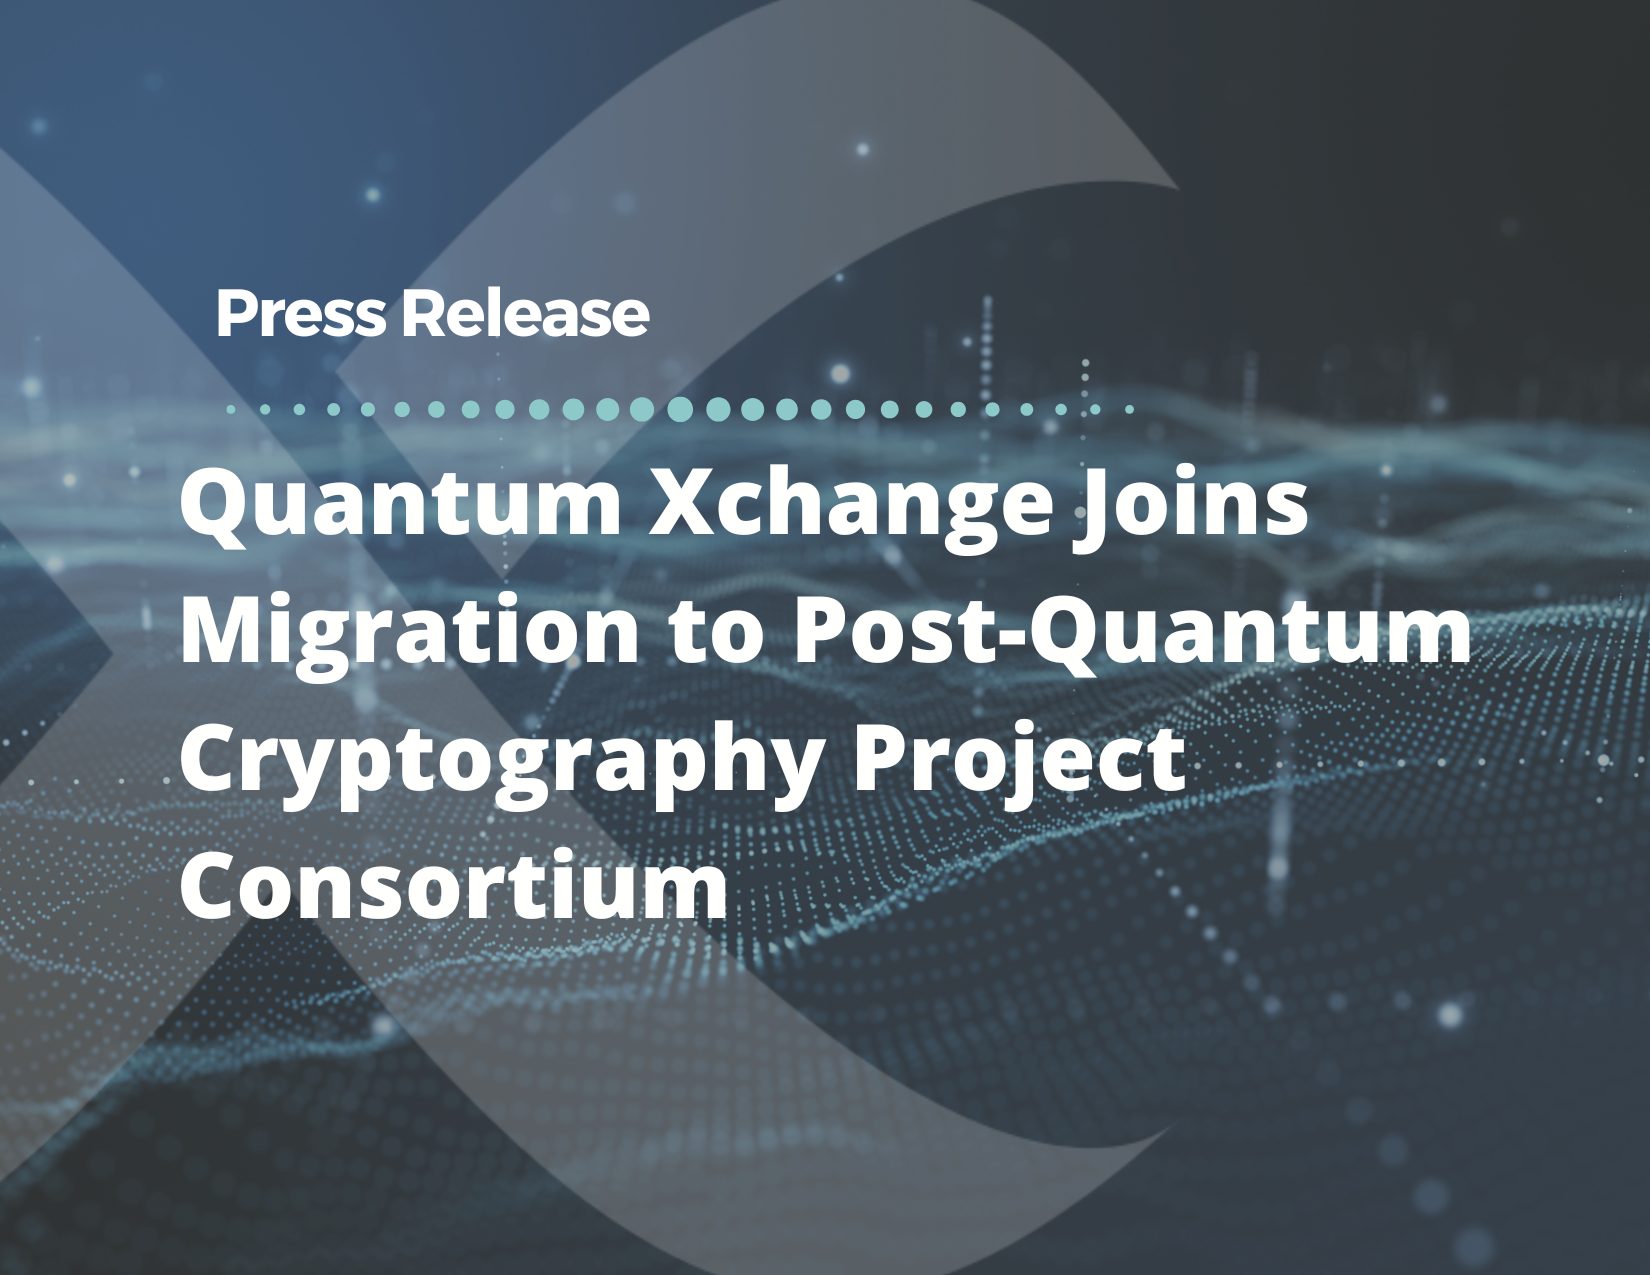 migration to post-quantum cryptography